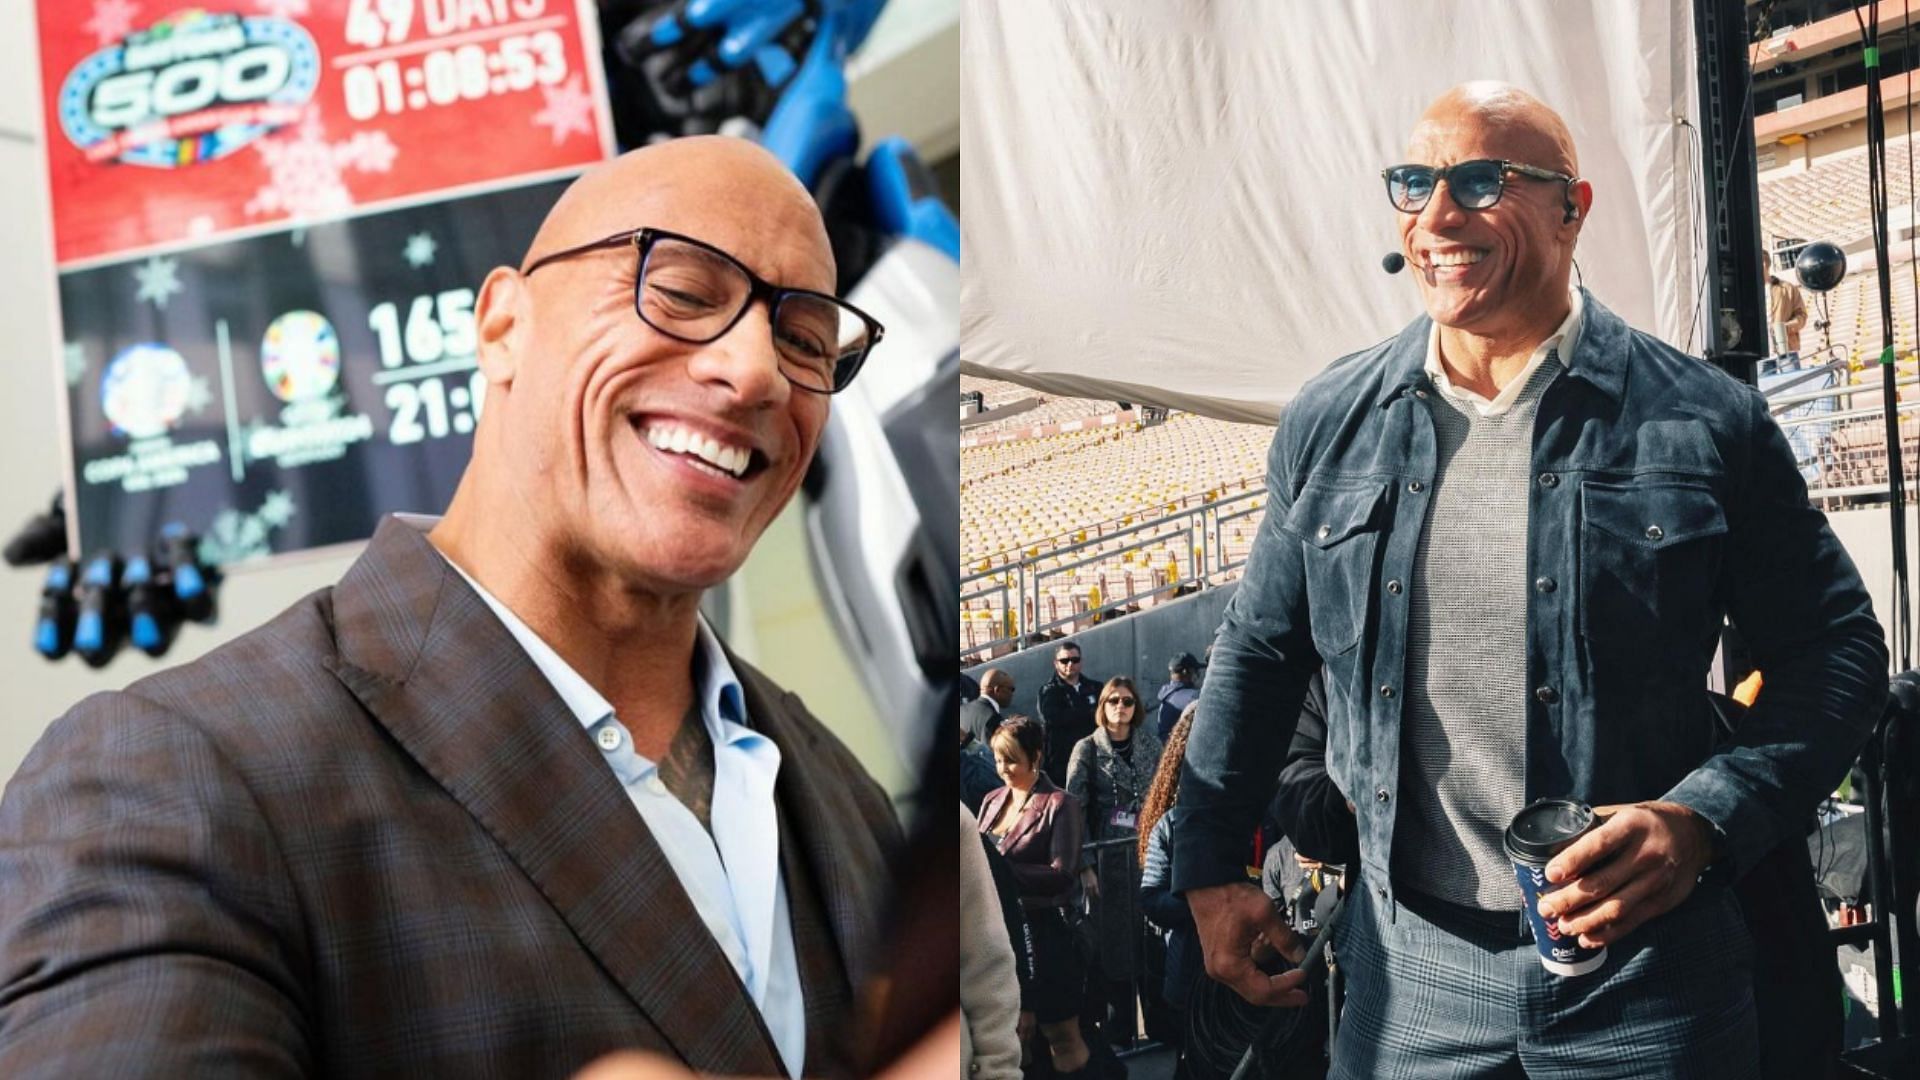 The Rock recently joined the TKO group